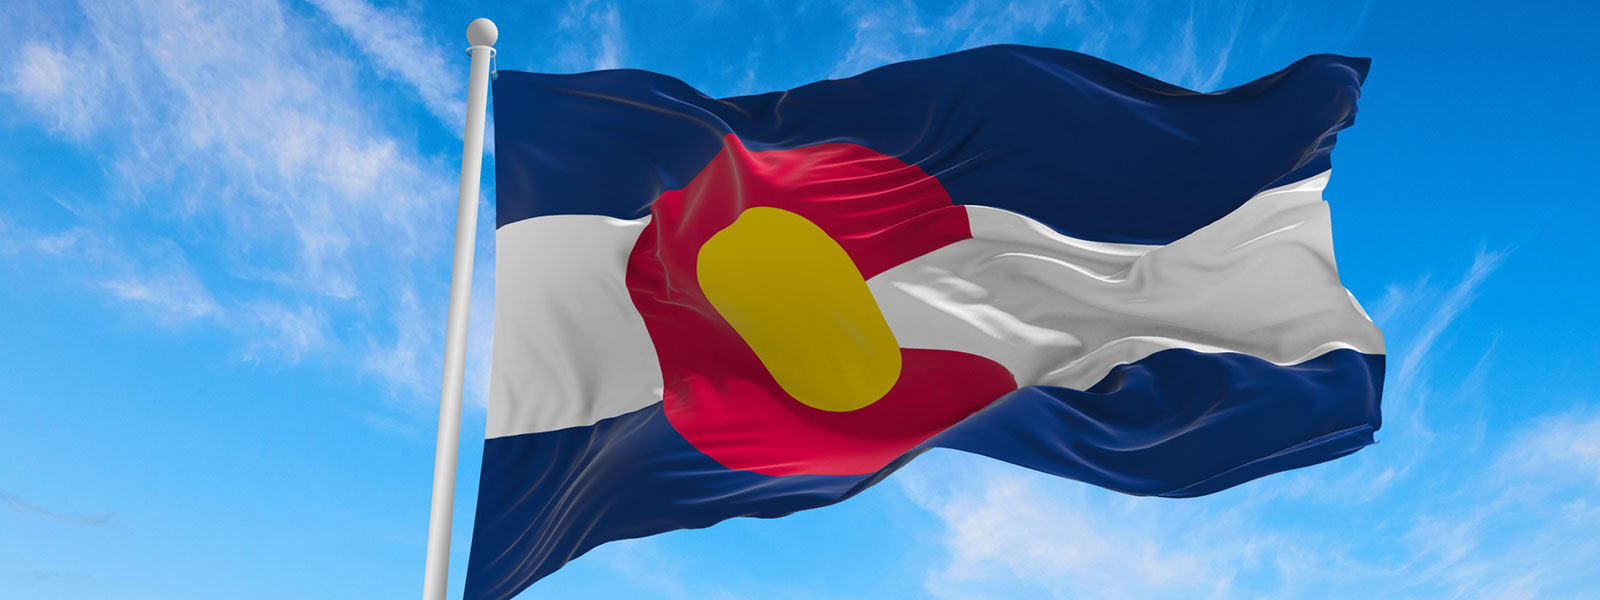 Colorado flag flying with a blue sky in the background